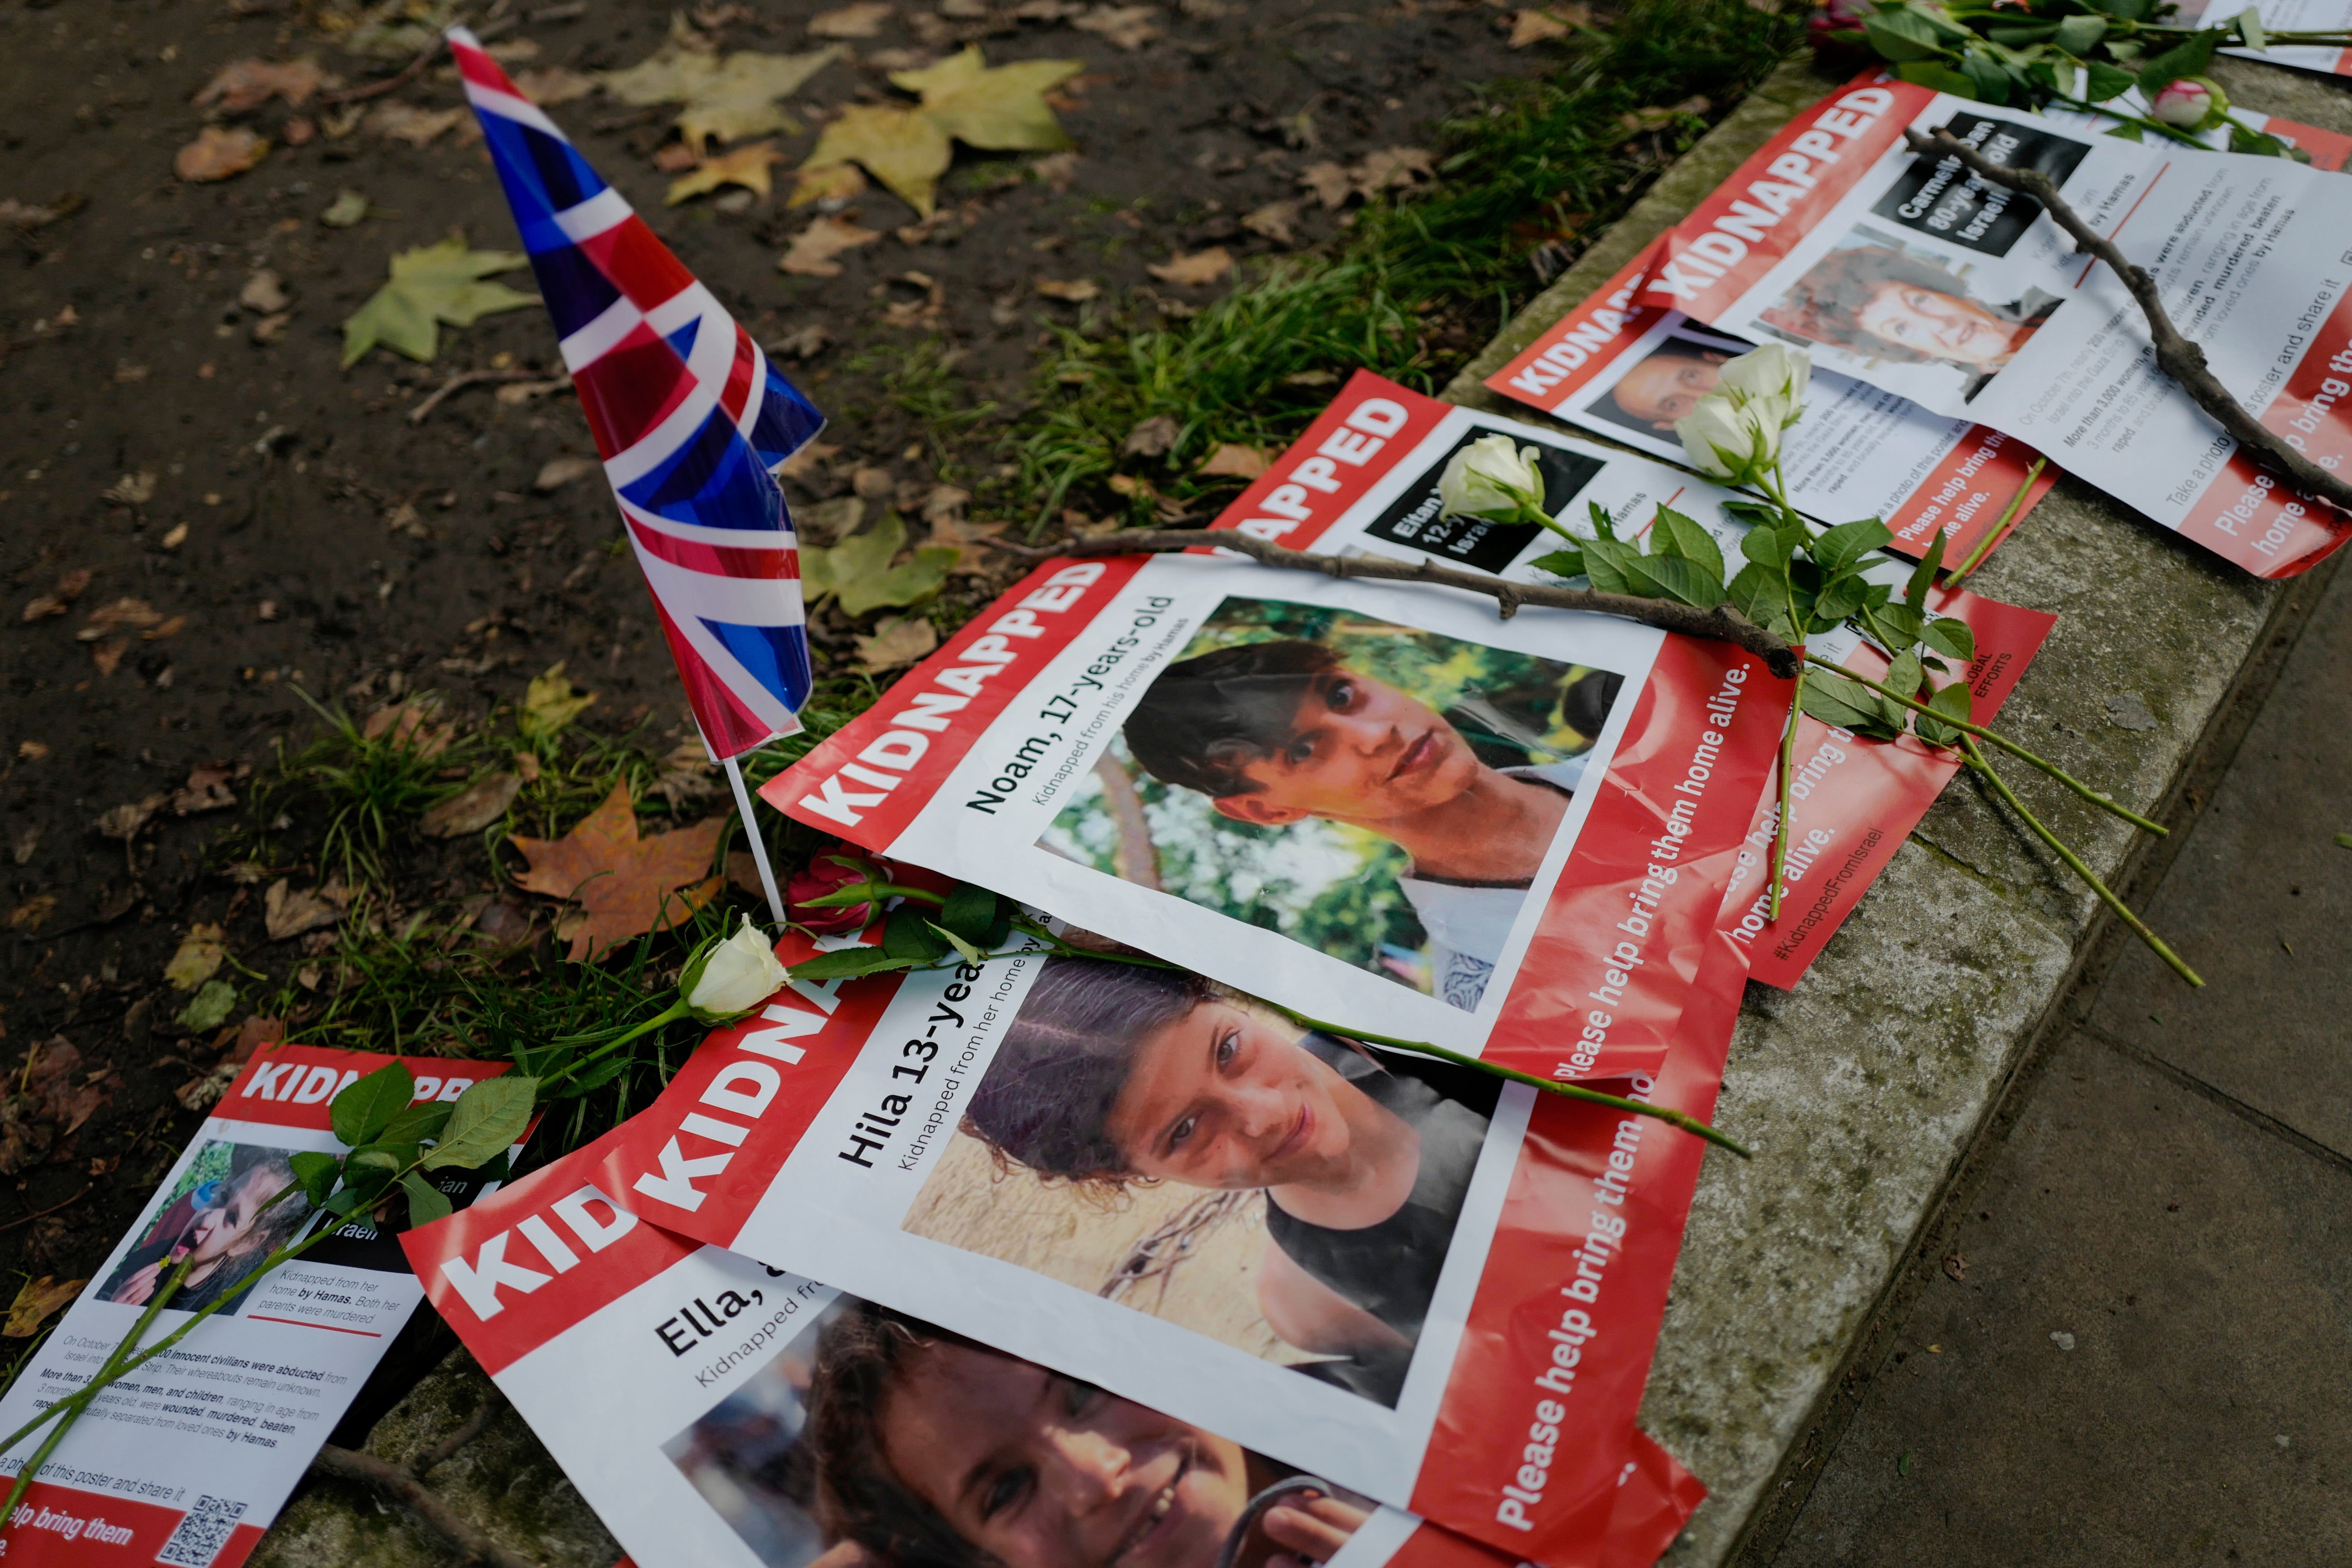 Posters outside Downing Street with the faces and names of some of those believed to have been taken hostage by Hamas